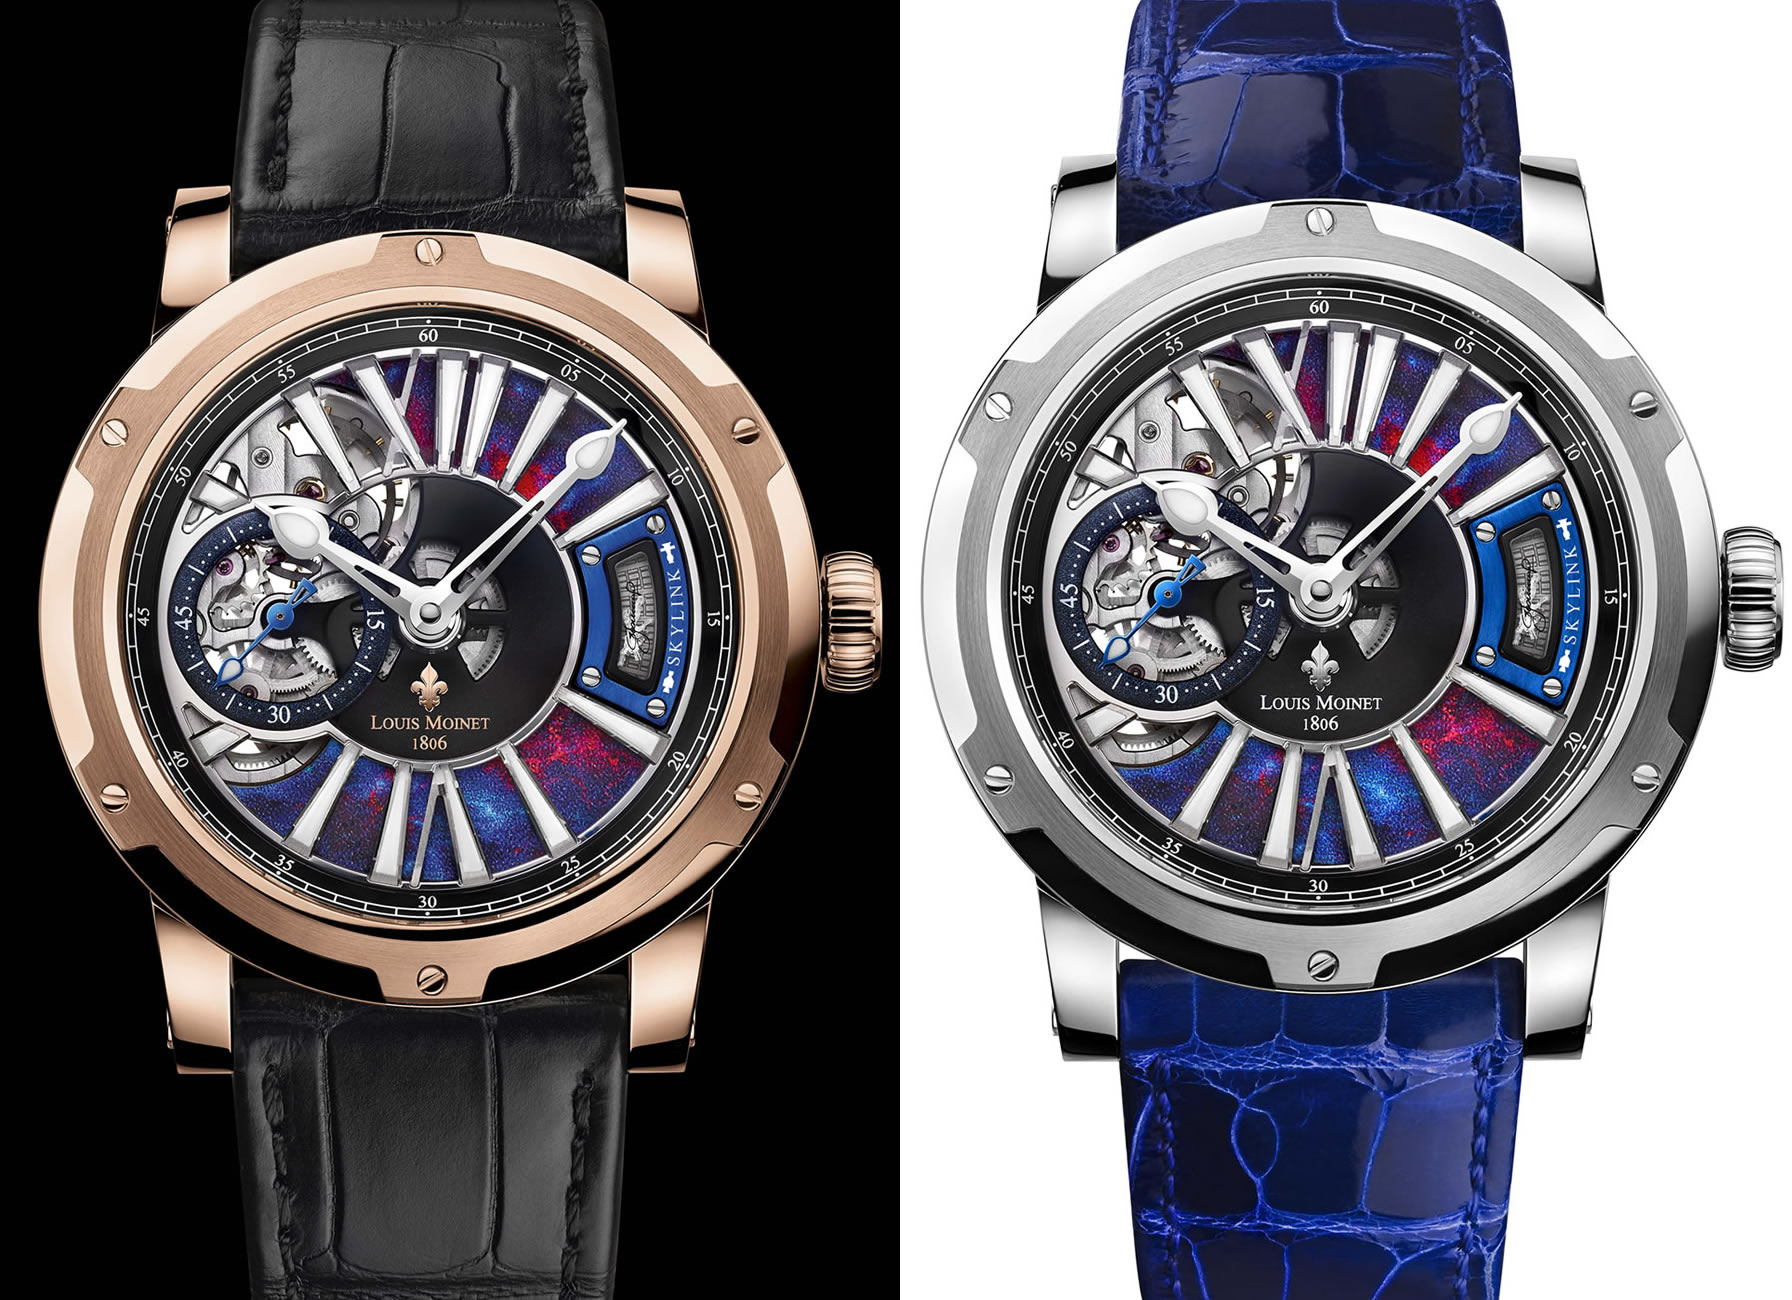 Louis Moinet celebrates the Apollo-Soyuz mission that changed the face of the world